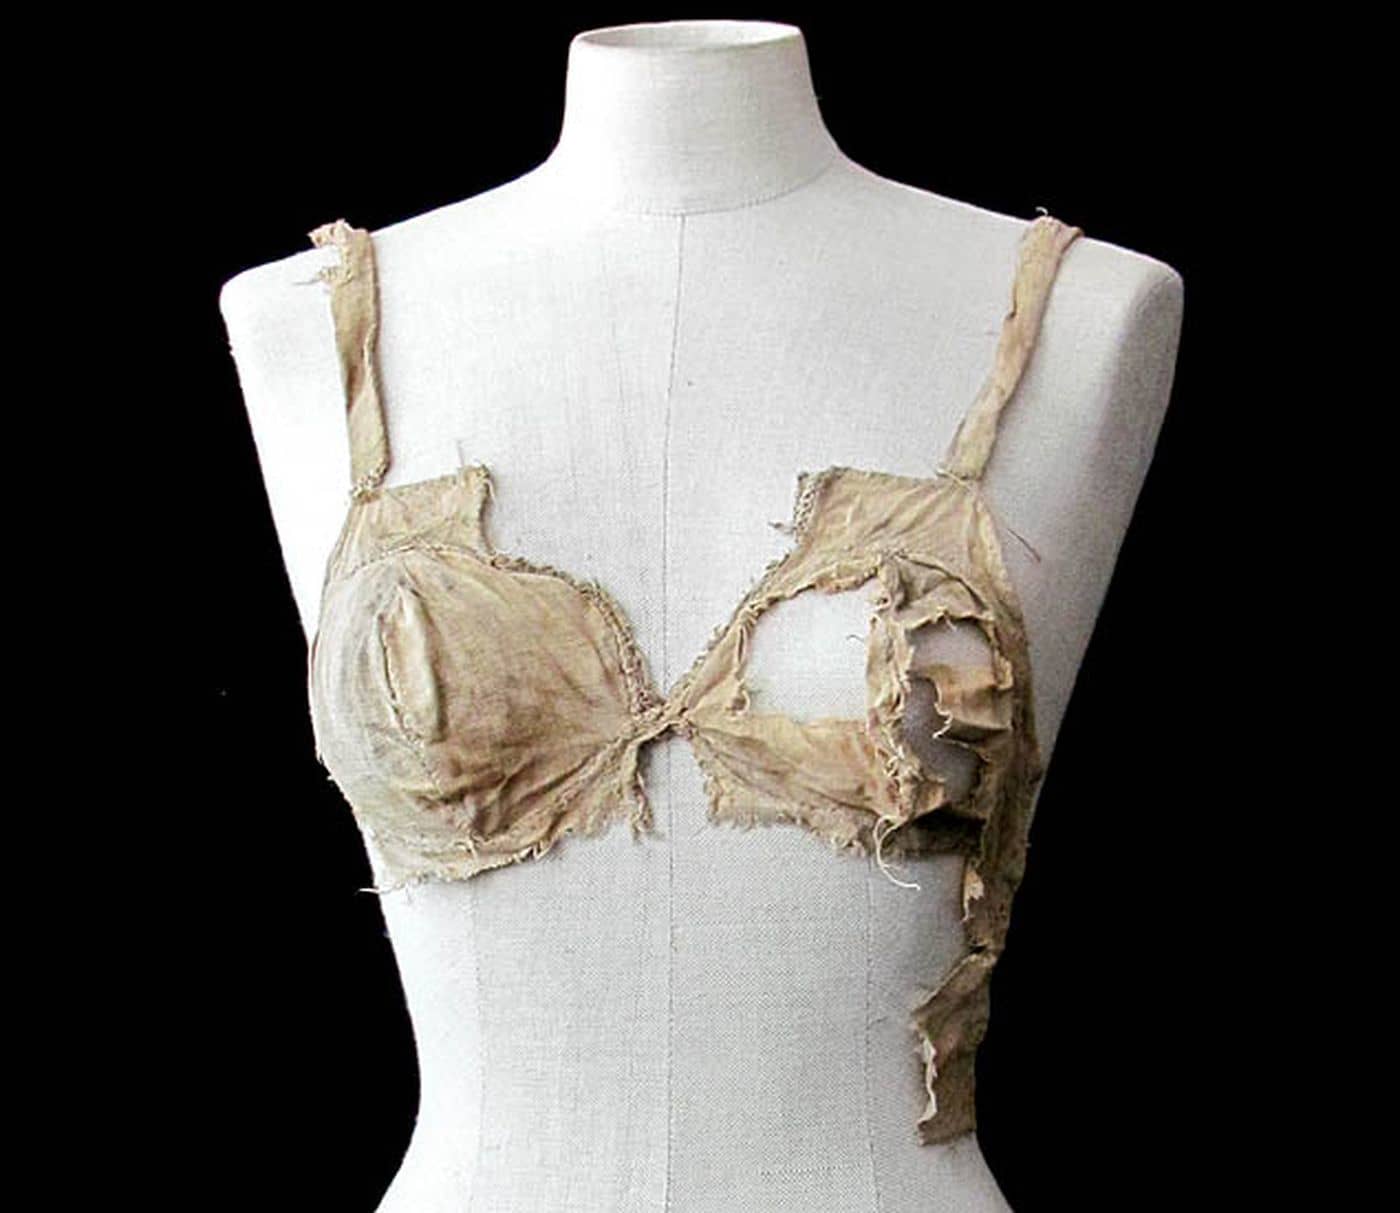 Video: The History of the Bra